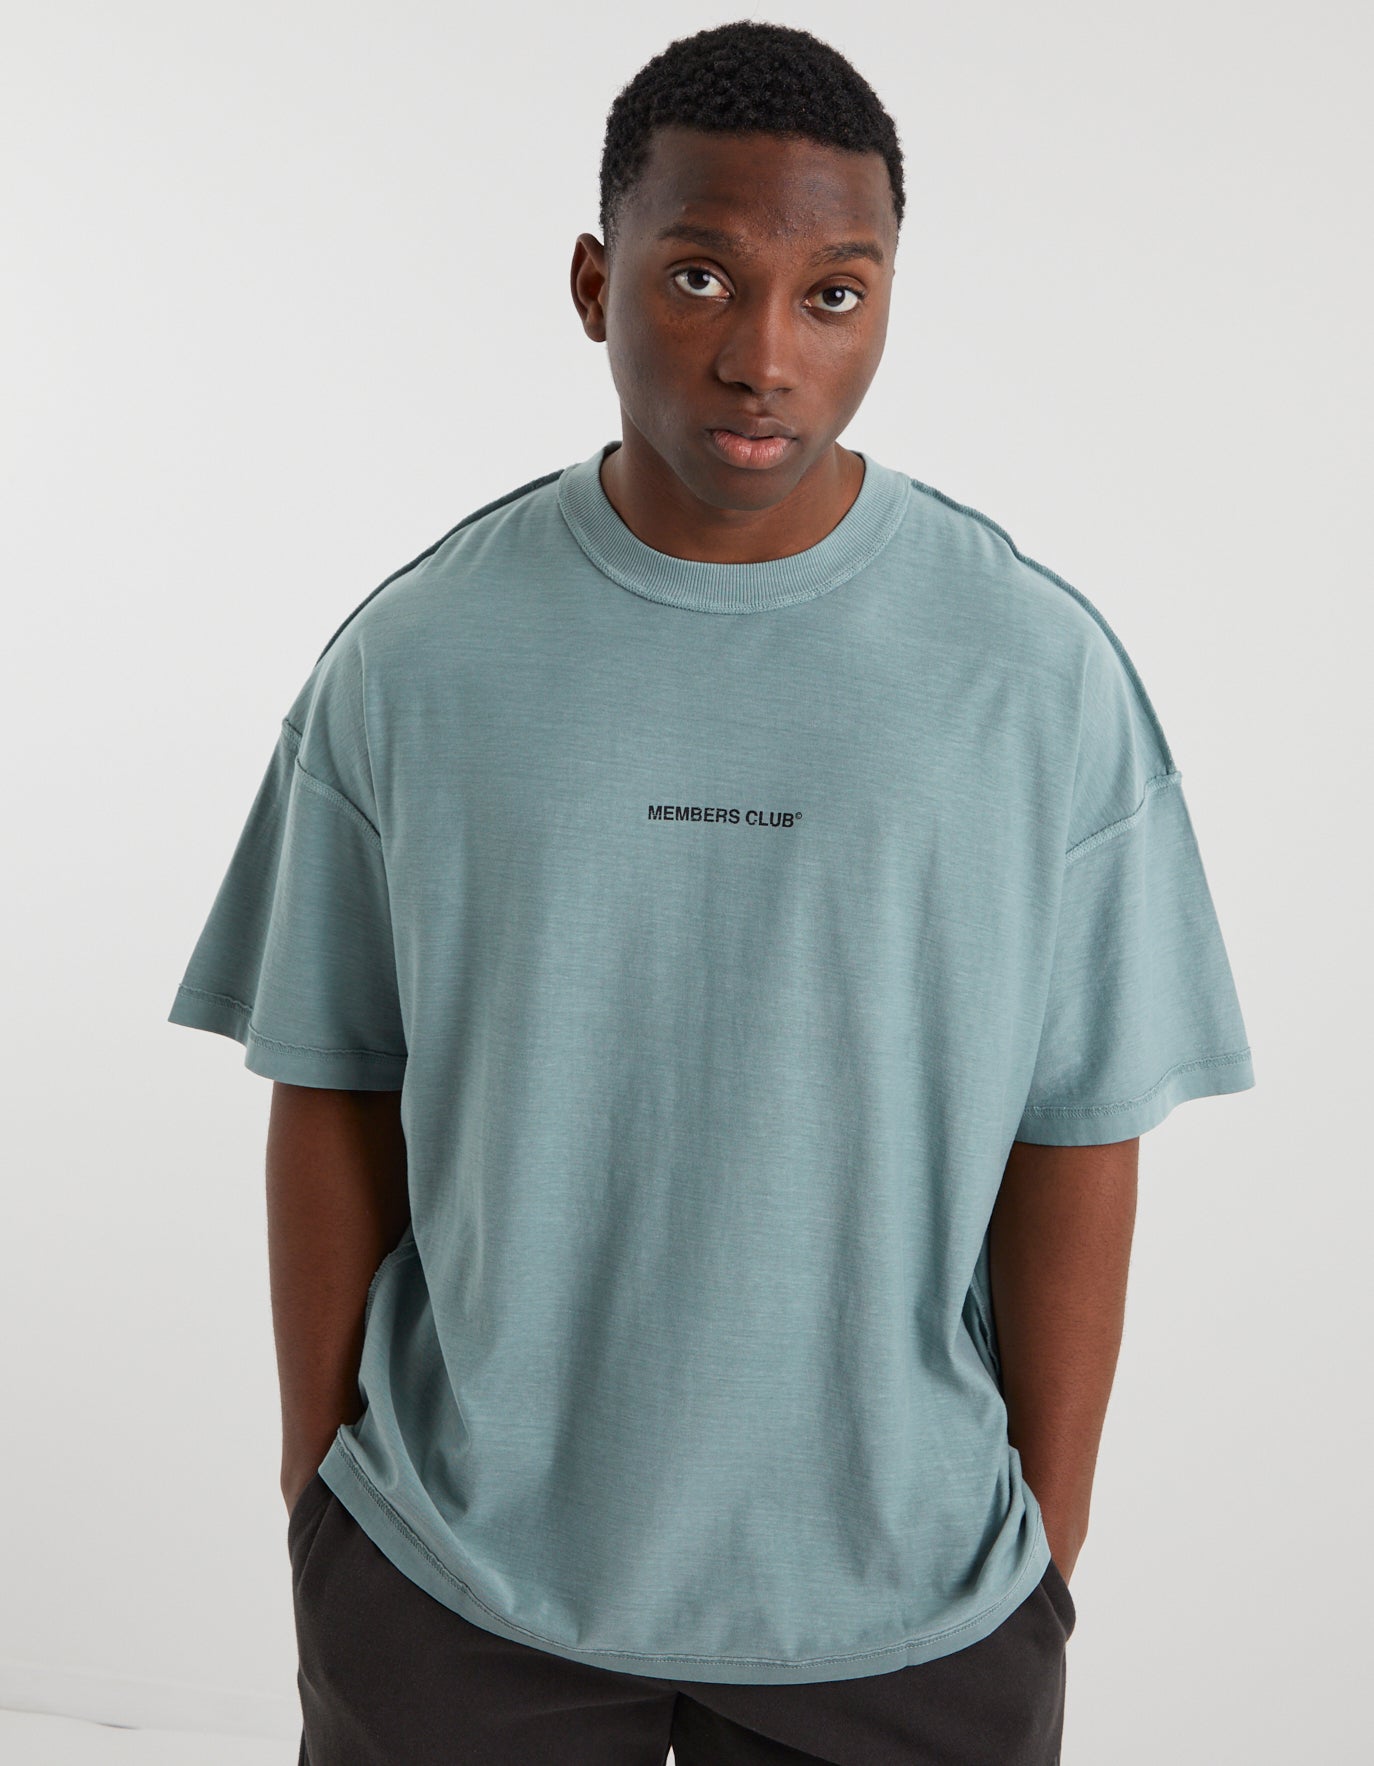 Members Club Inside Out Graphic T-shirt in Sage